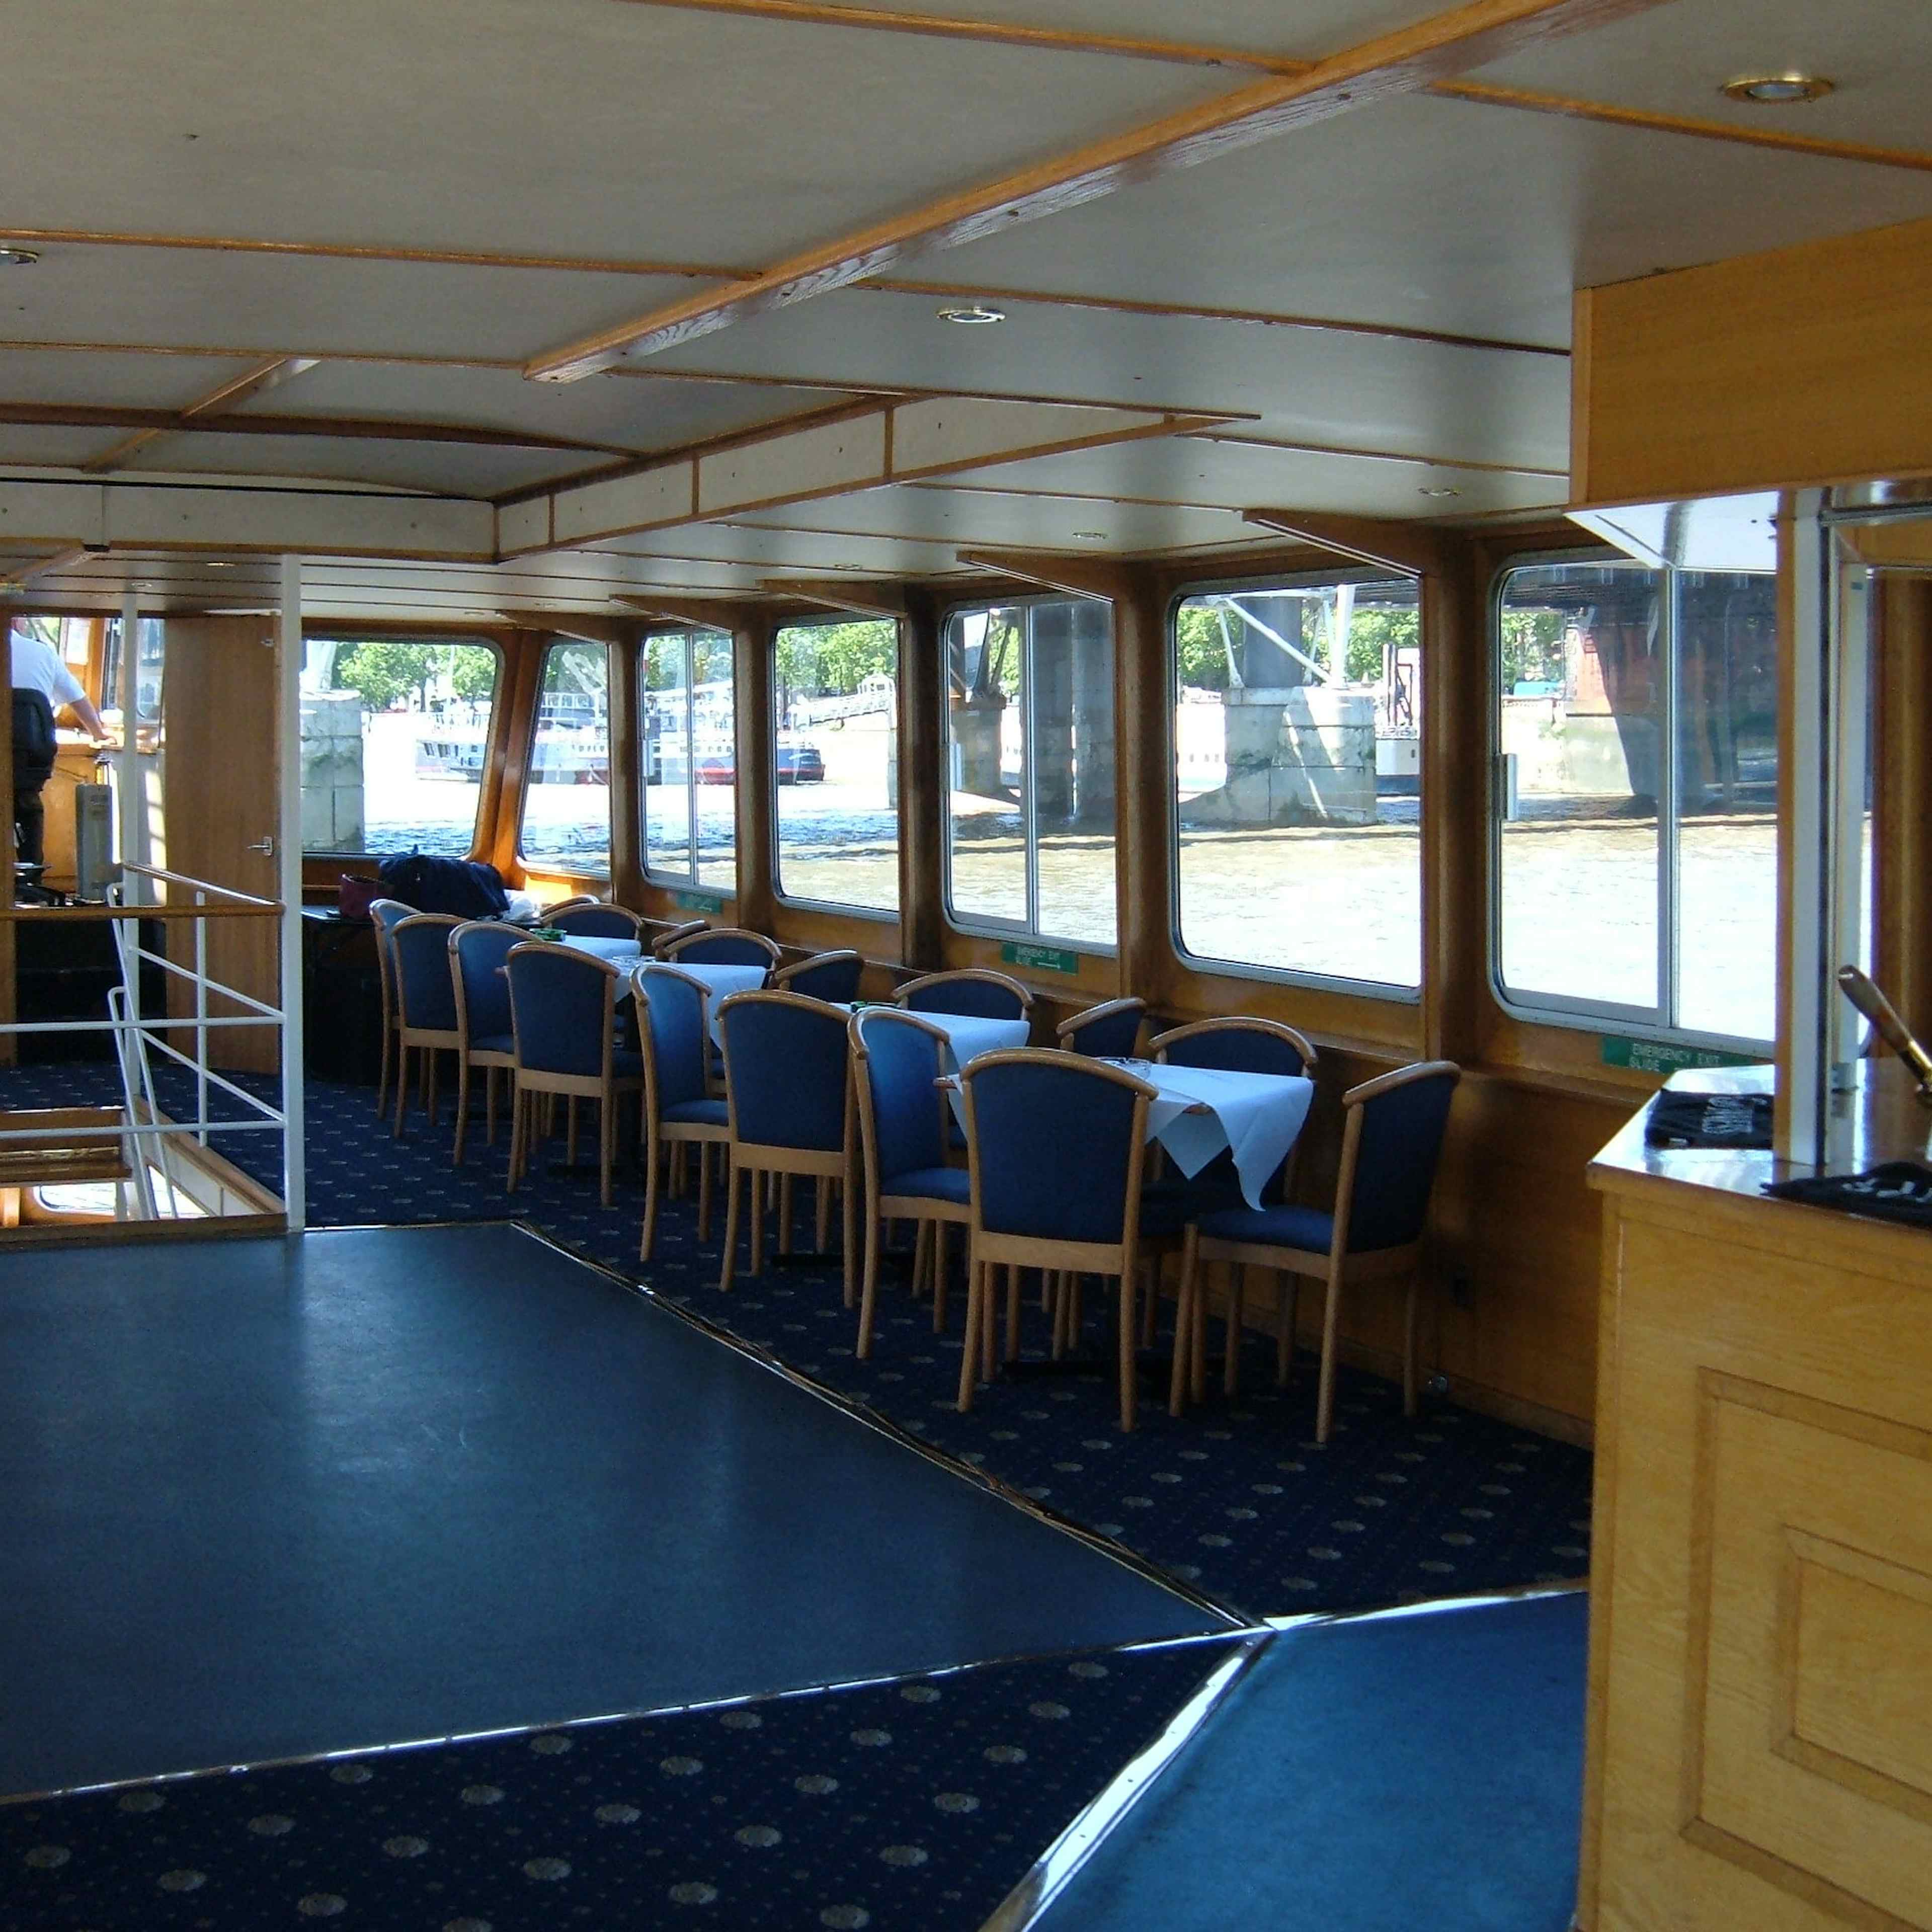 The Salient River Boat - Exclusive hire image 3